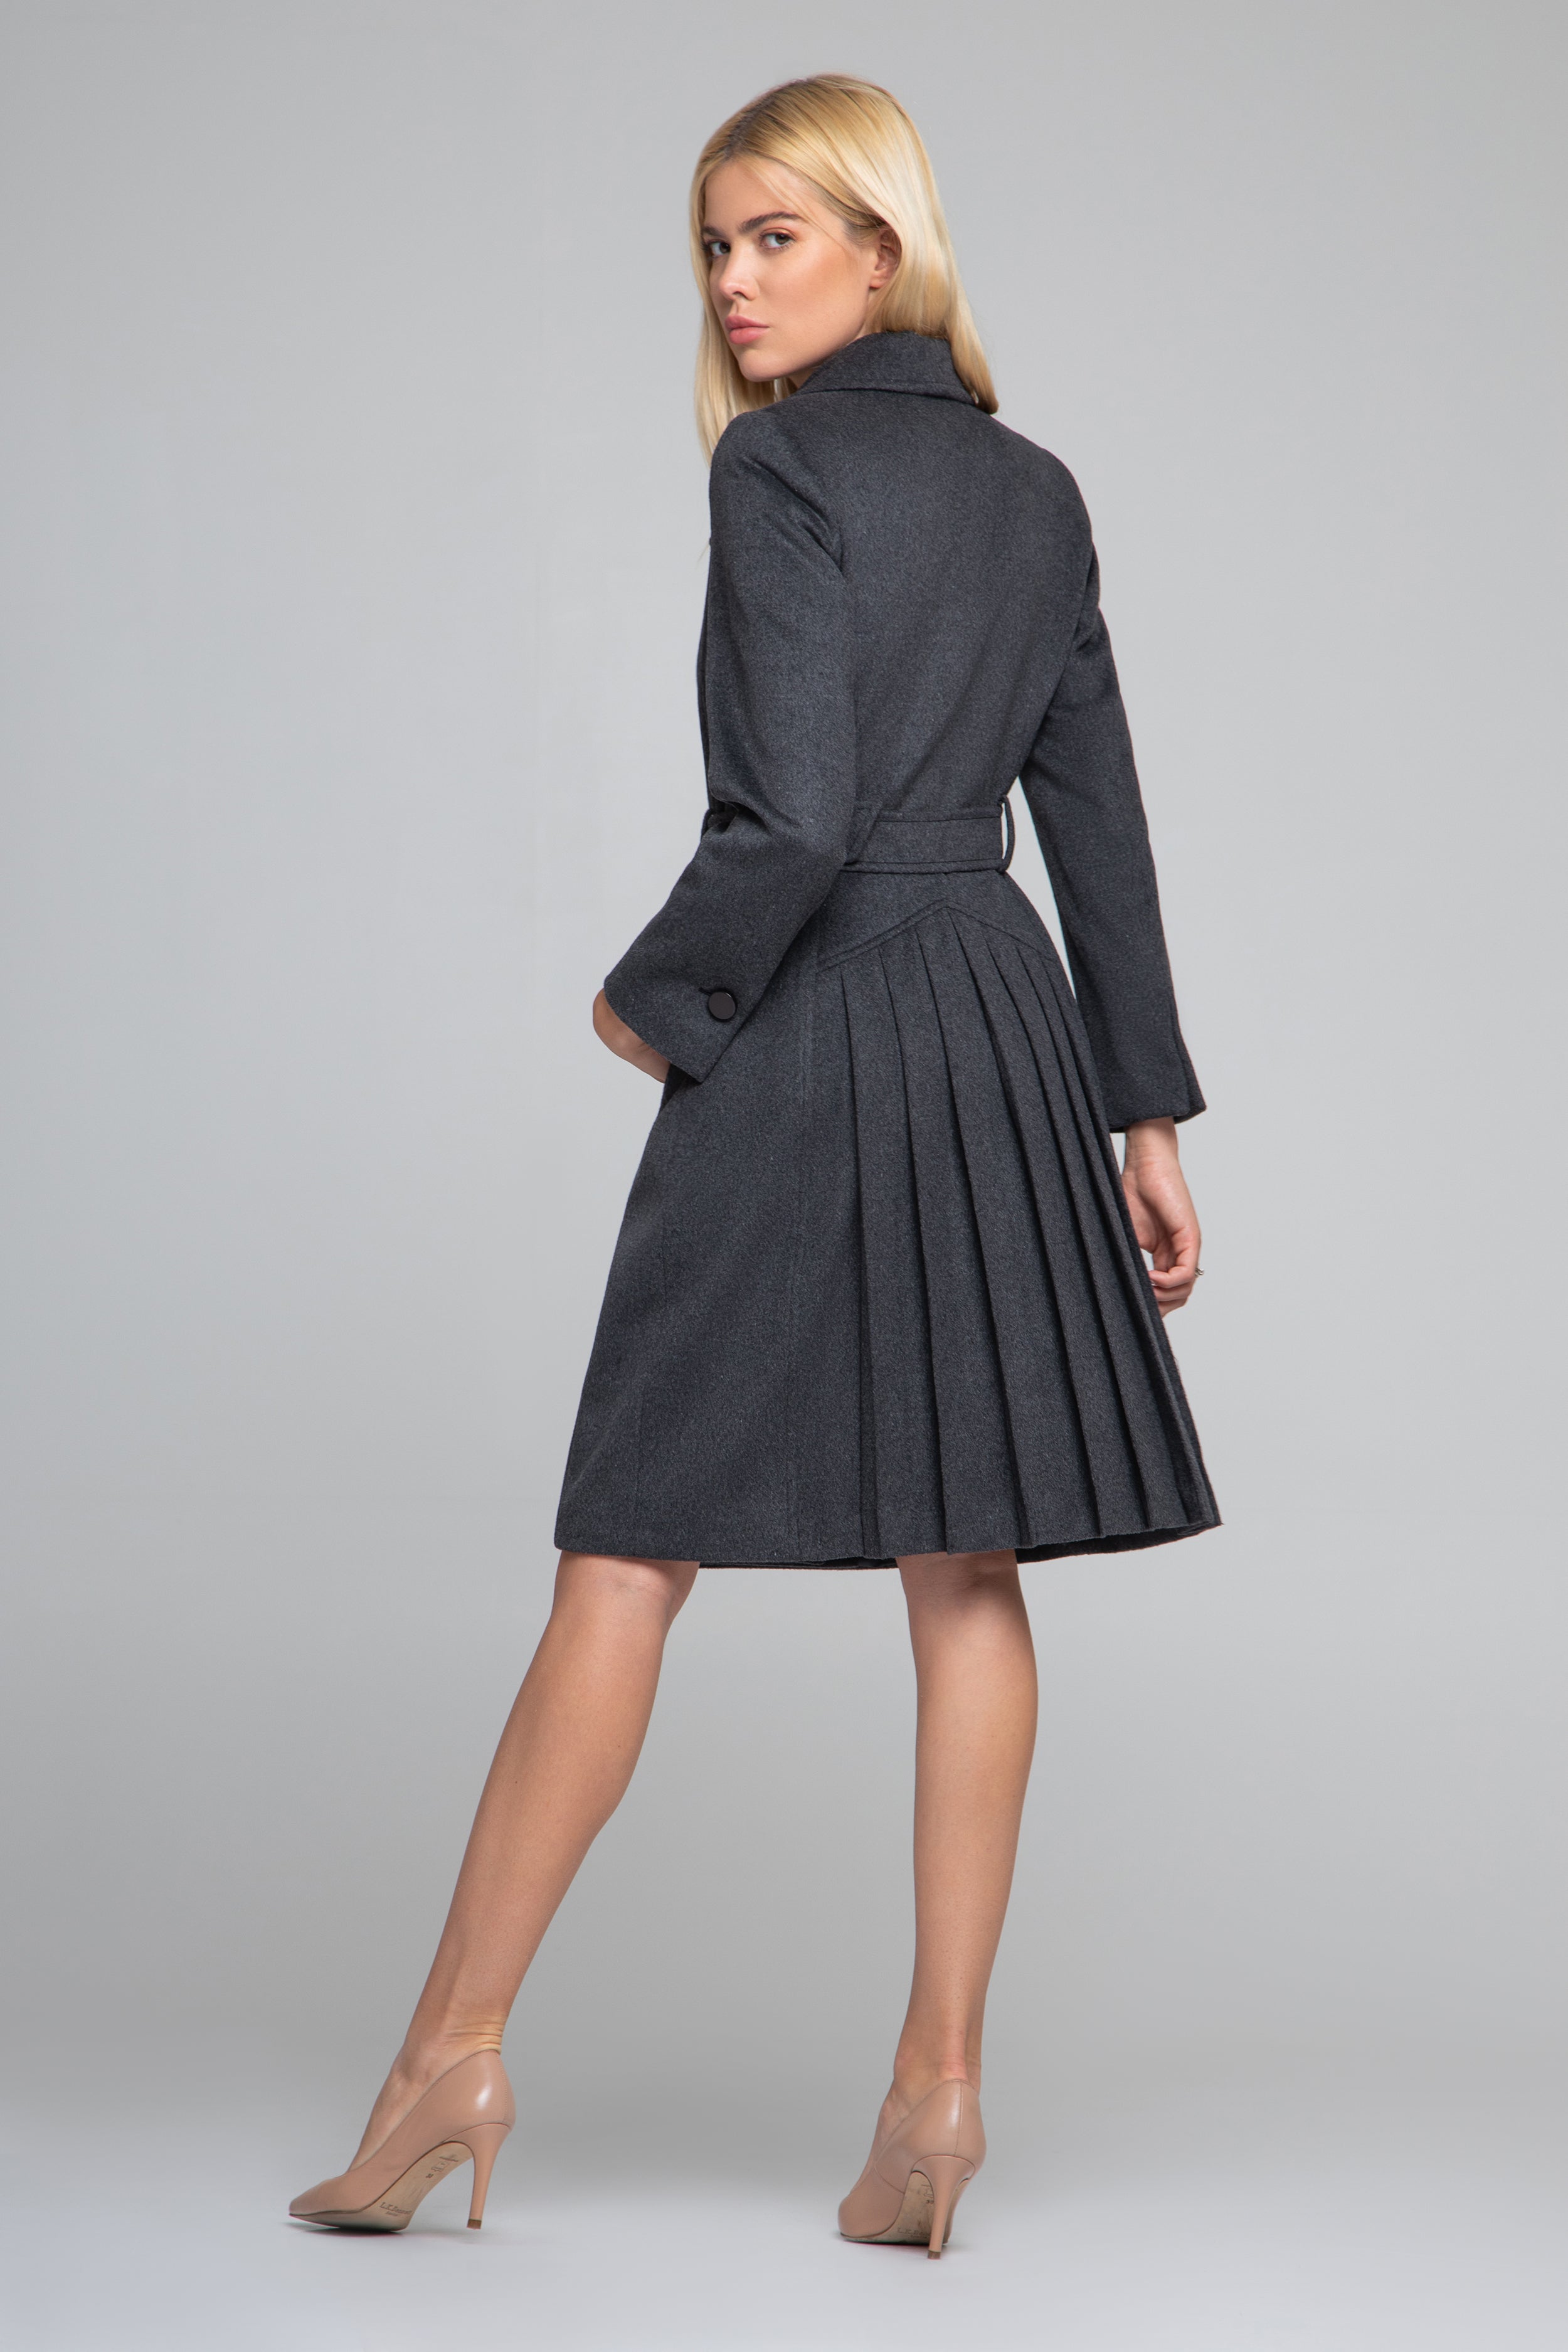 Grey wool and cashmere blend coat with double-breasted silhouette and pleated back